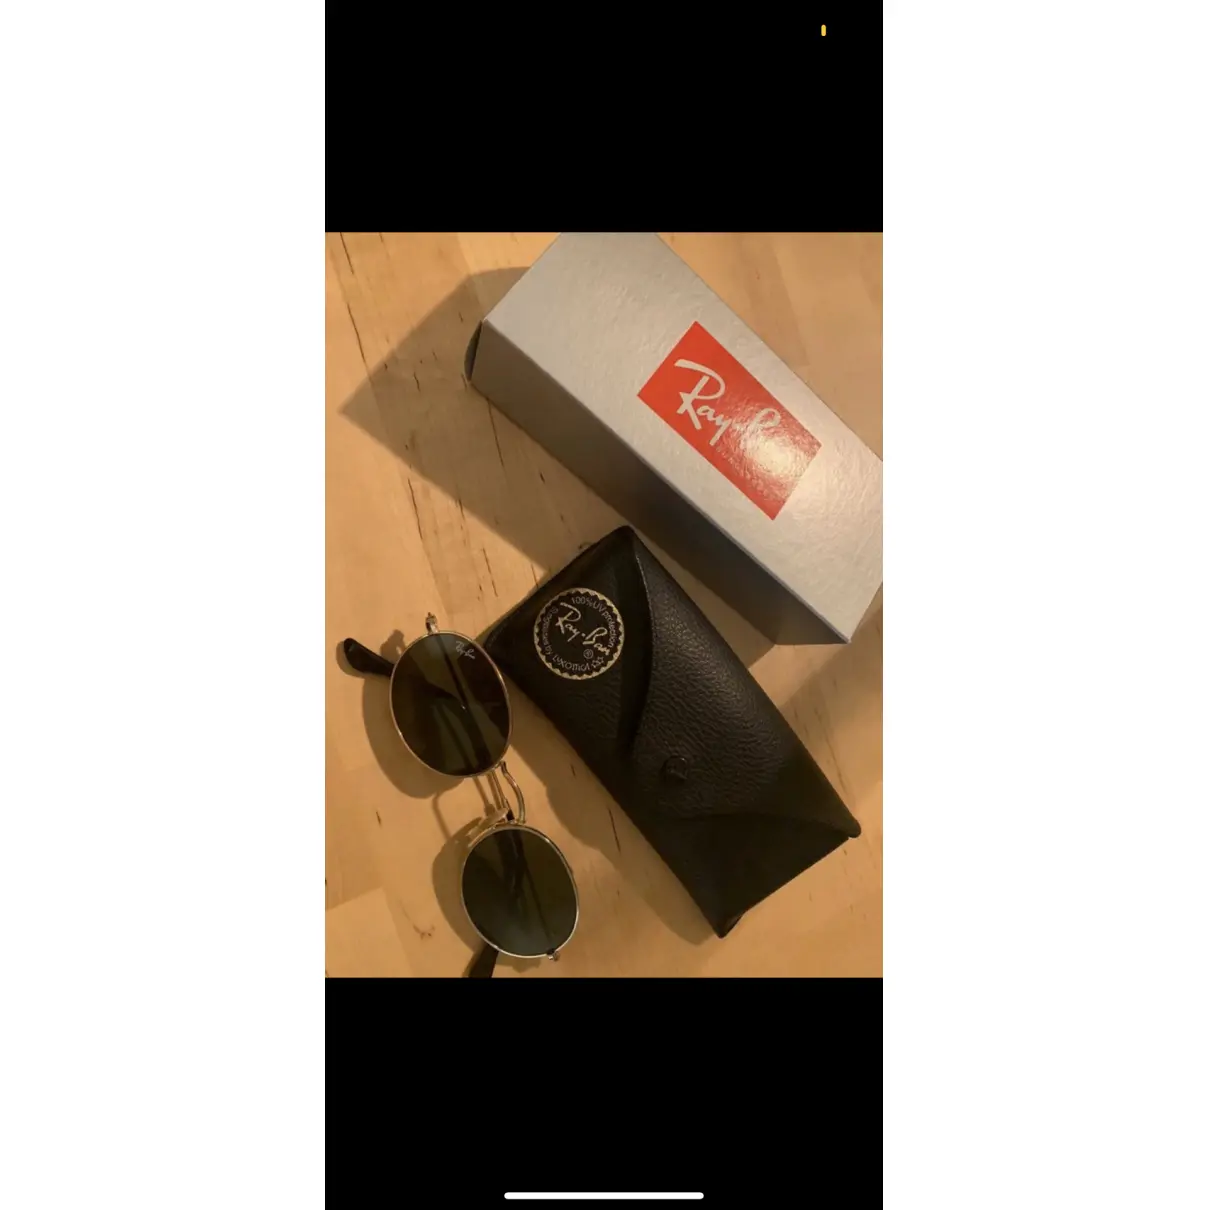 Buy Ray-Ban Oval sunglasses online